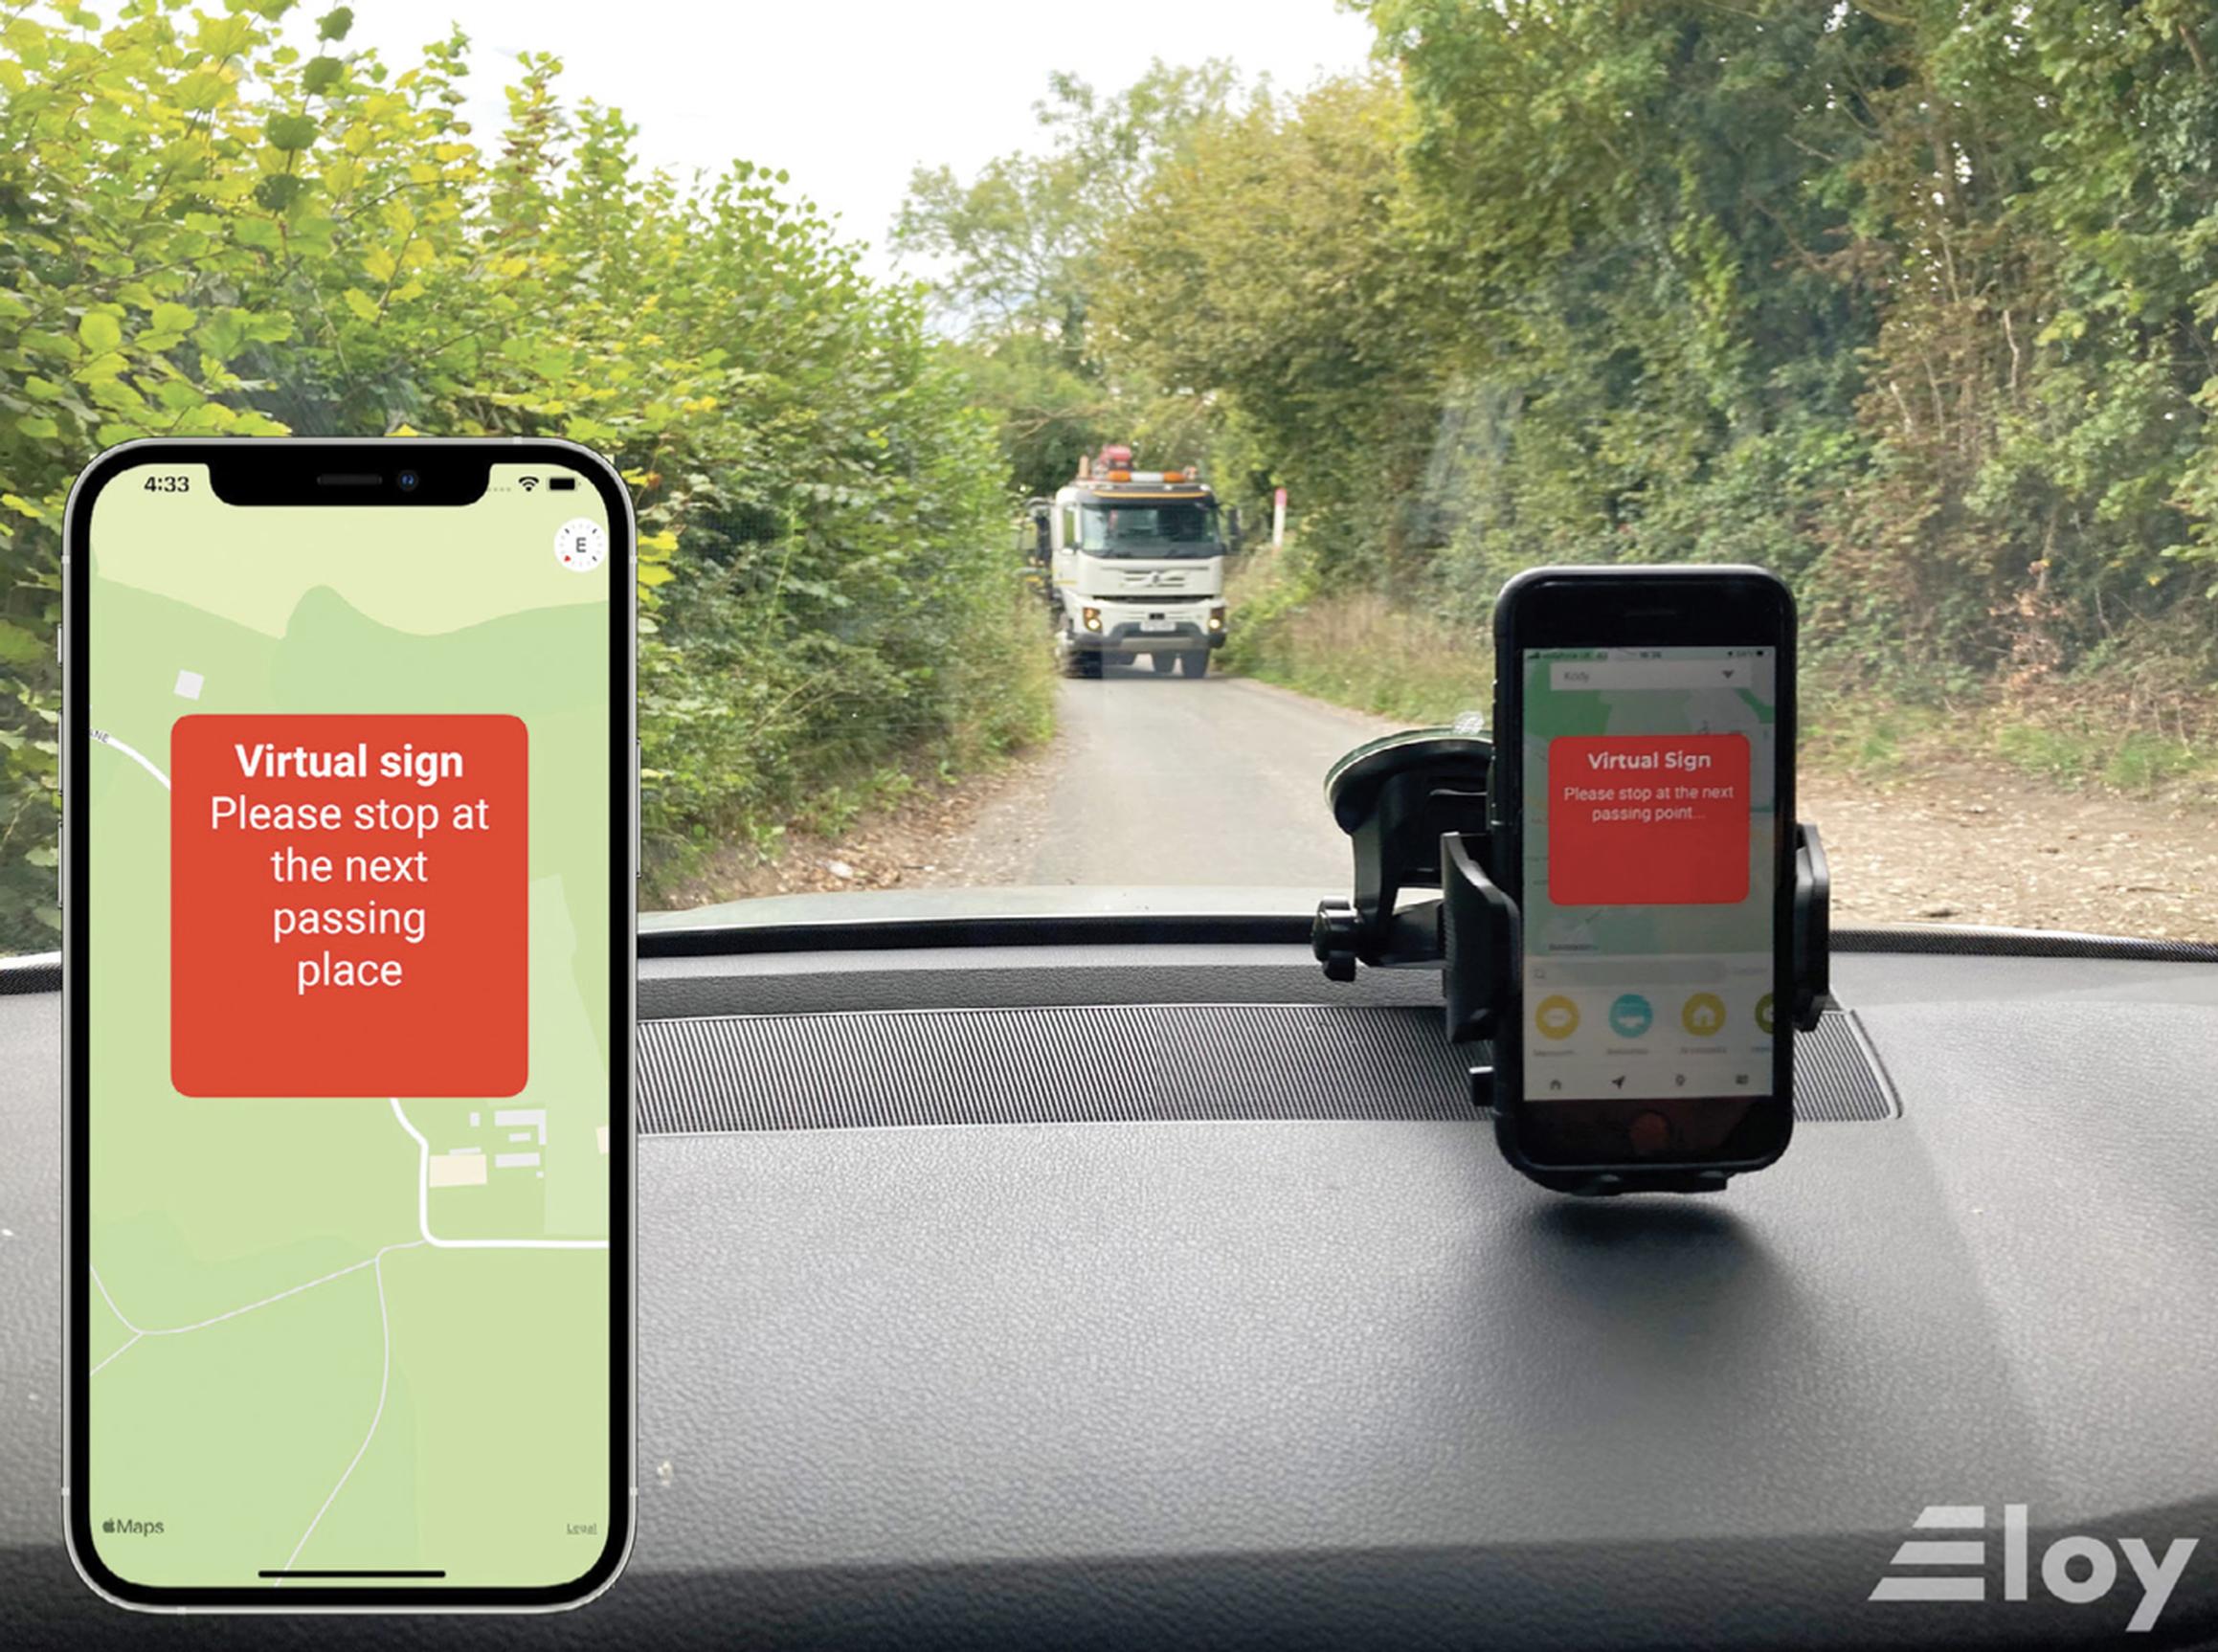 Eloy’s proposal for combining IVS warnings with satnav on single-track roads